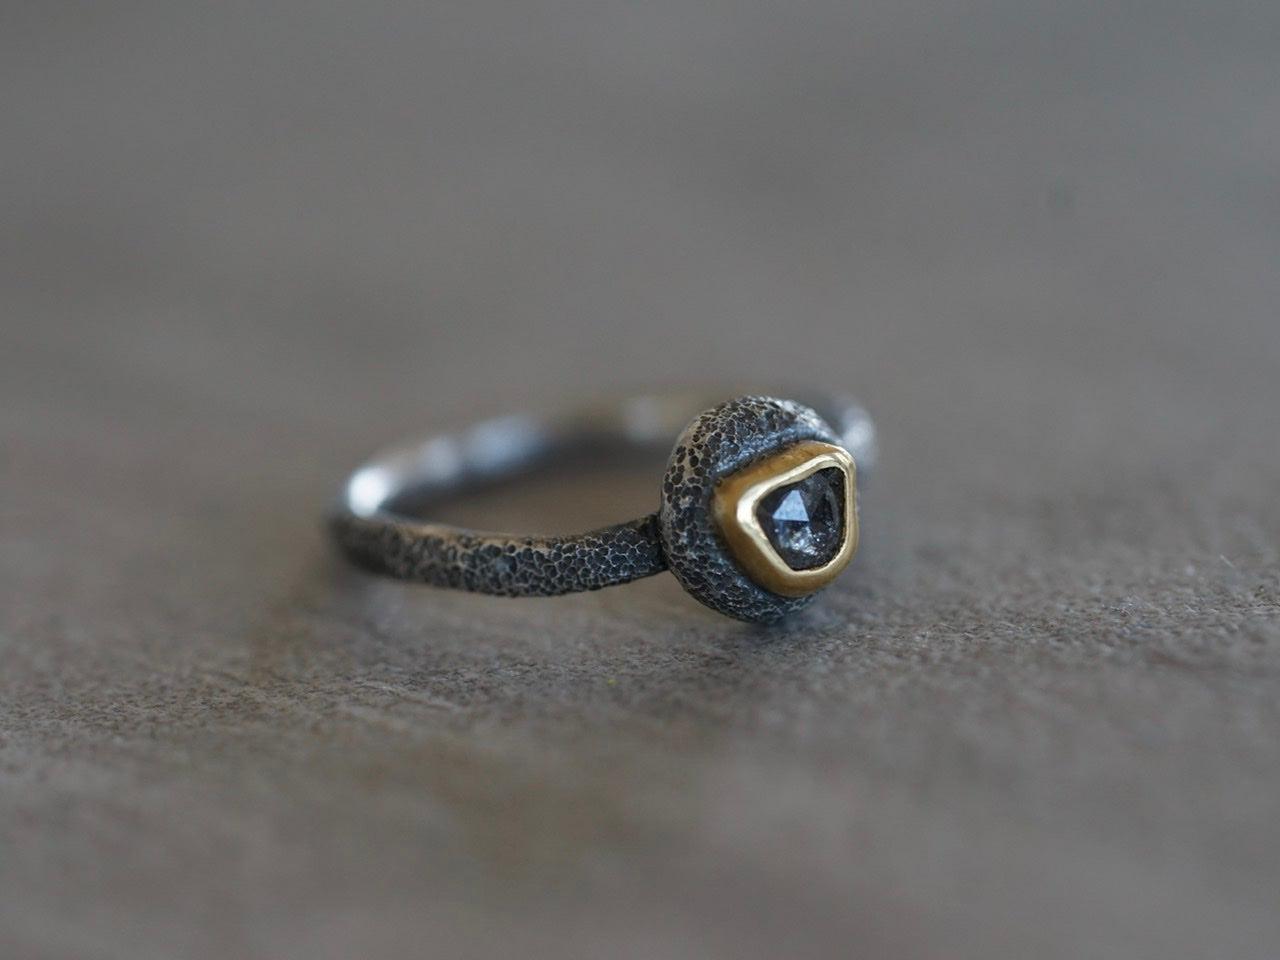 Brown salt and pepper diamond and 22k gold ring size 6.75